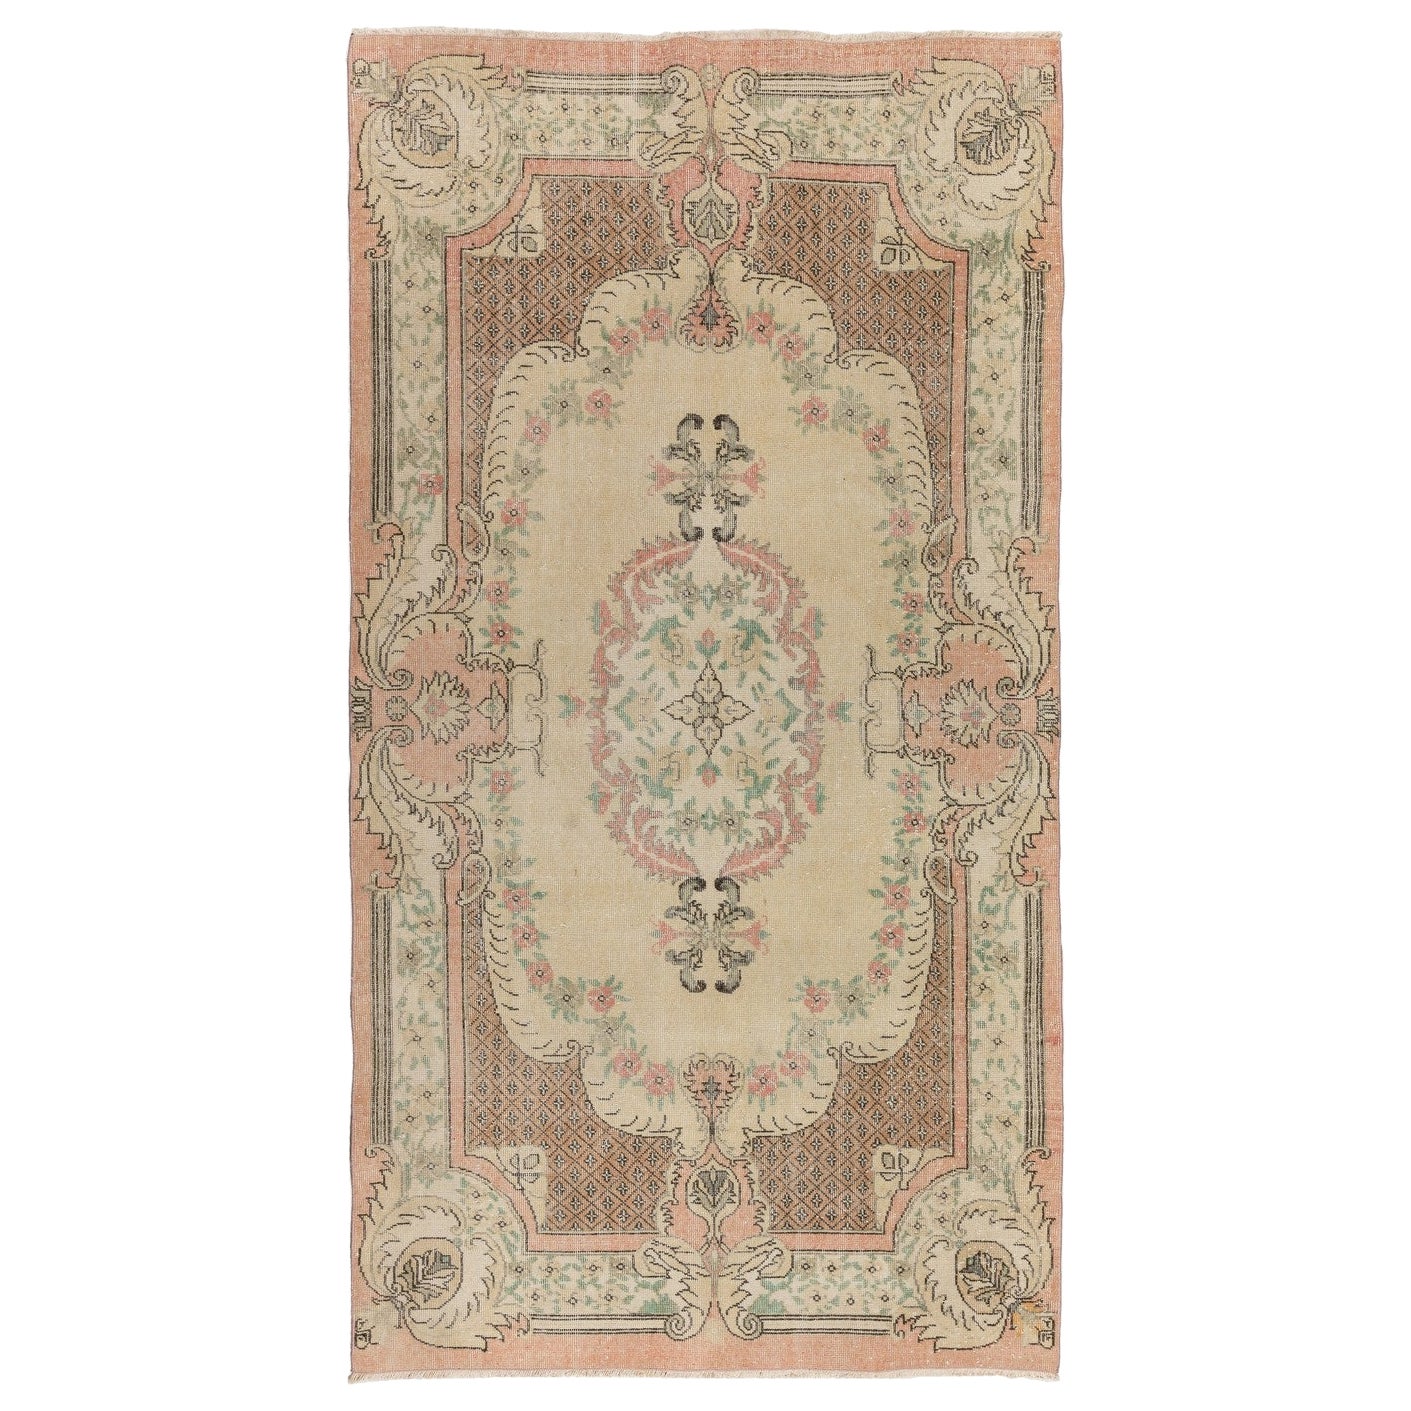 5.6x9.7 Ft Aubusson Inspired Vintage Handmade Turkish Rug in Peach & Pale Yellow